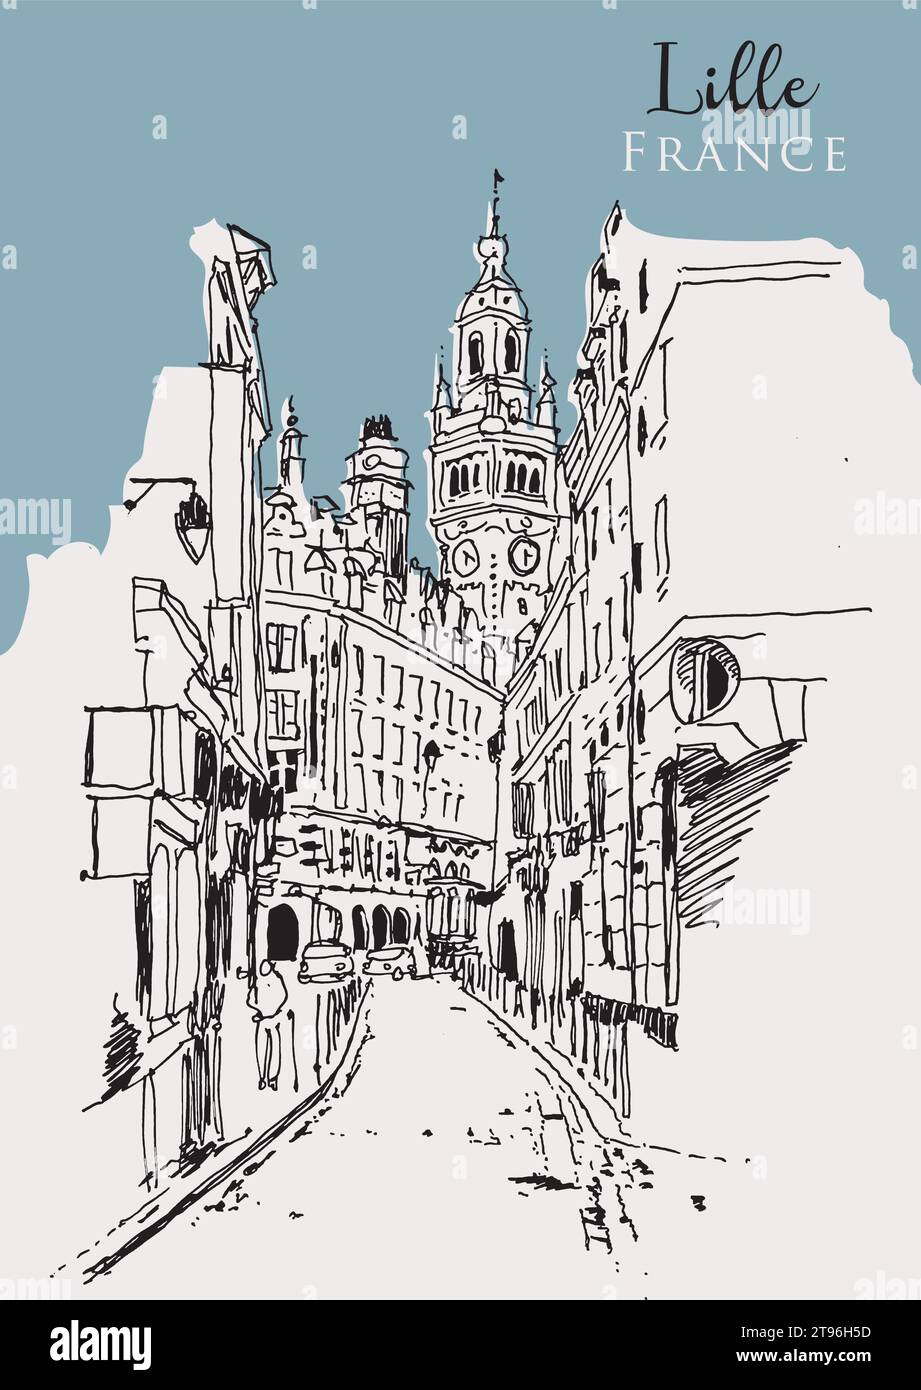 Vector hand drawn sketch illustration of Lille, with the tower of the Lille town hall, France Stock Vector